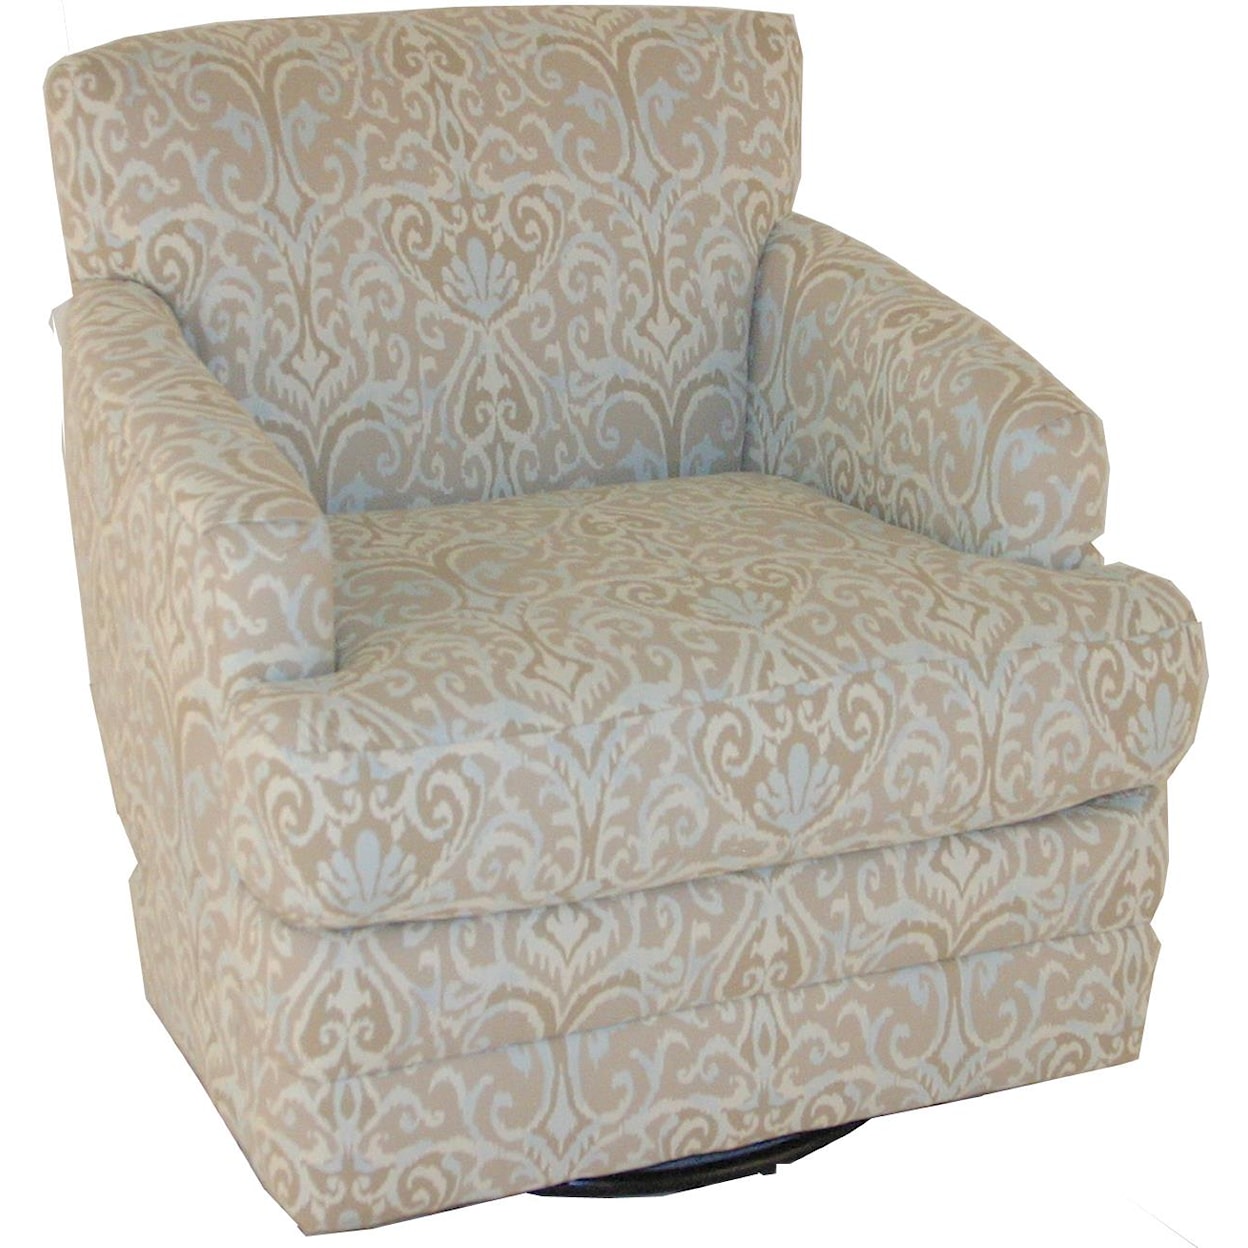 Chairs America Accent Chairs and Ottomans Transitional Swivel Rocker